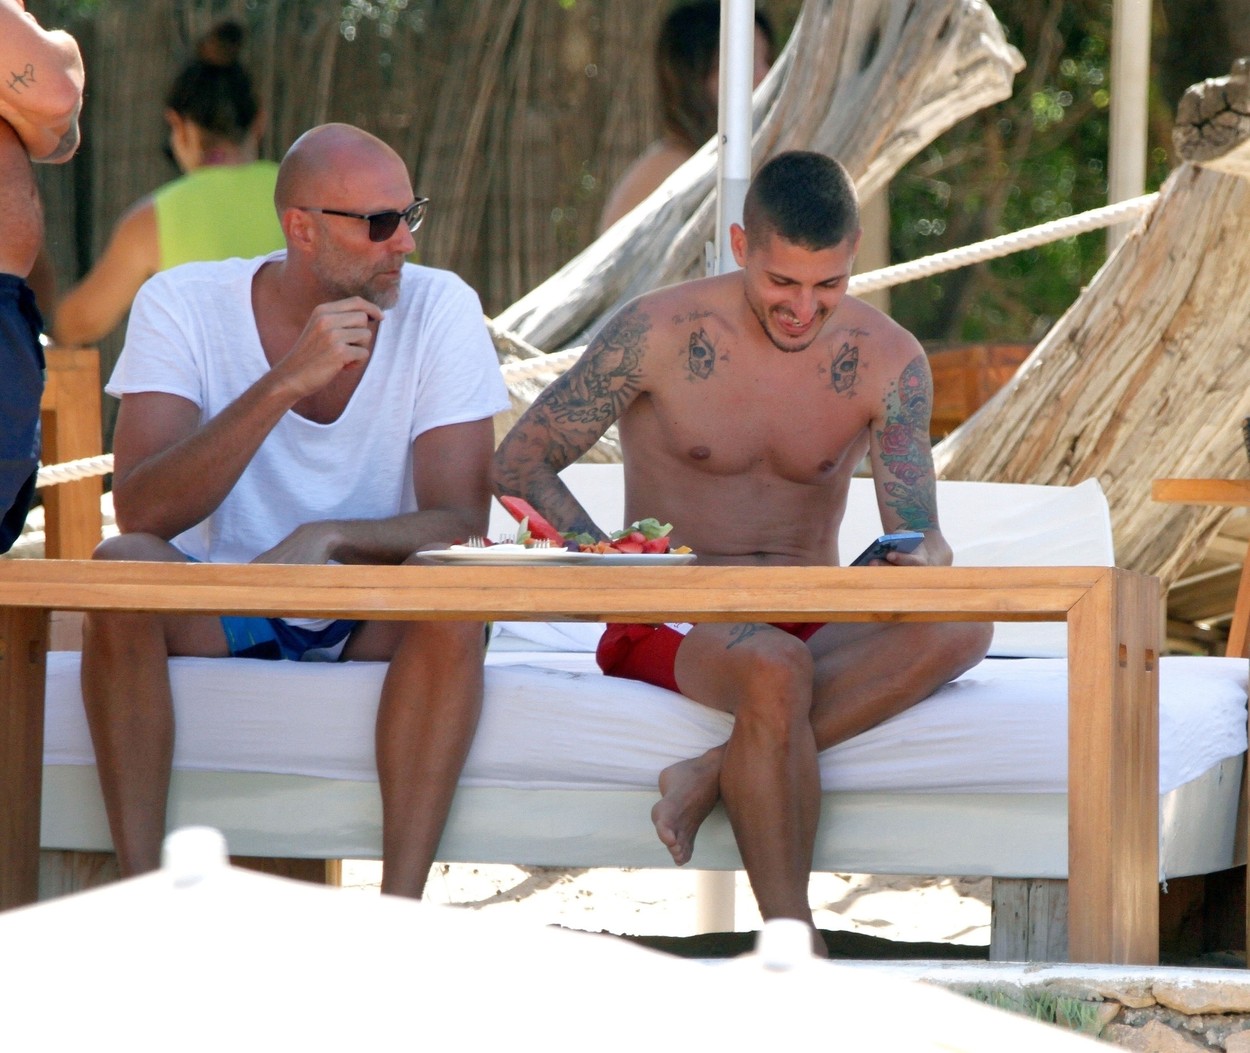 IBIZA, SPAIN  -  *EXCLUSIVE*  - PSG's Italian footaballer Marco Verratti and his wife Jessica Aidi spend a few days off from Marco's pre season break on the Spanish island of Ibiza in the company of family and friends.

BACKGRID UK 12 JUNE 2022,Image: 699240324, License: Rights-managed, Restrictions: RIGHTS: WORLDWIDE EXCEPT IN ITALY, SPAIN, Model Release: no, Pictured: Marco Verratti, Credit line: Profimedia